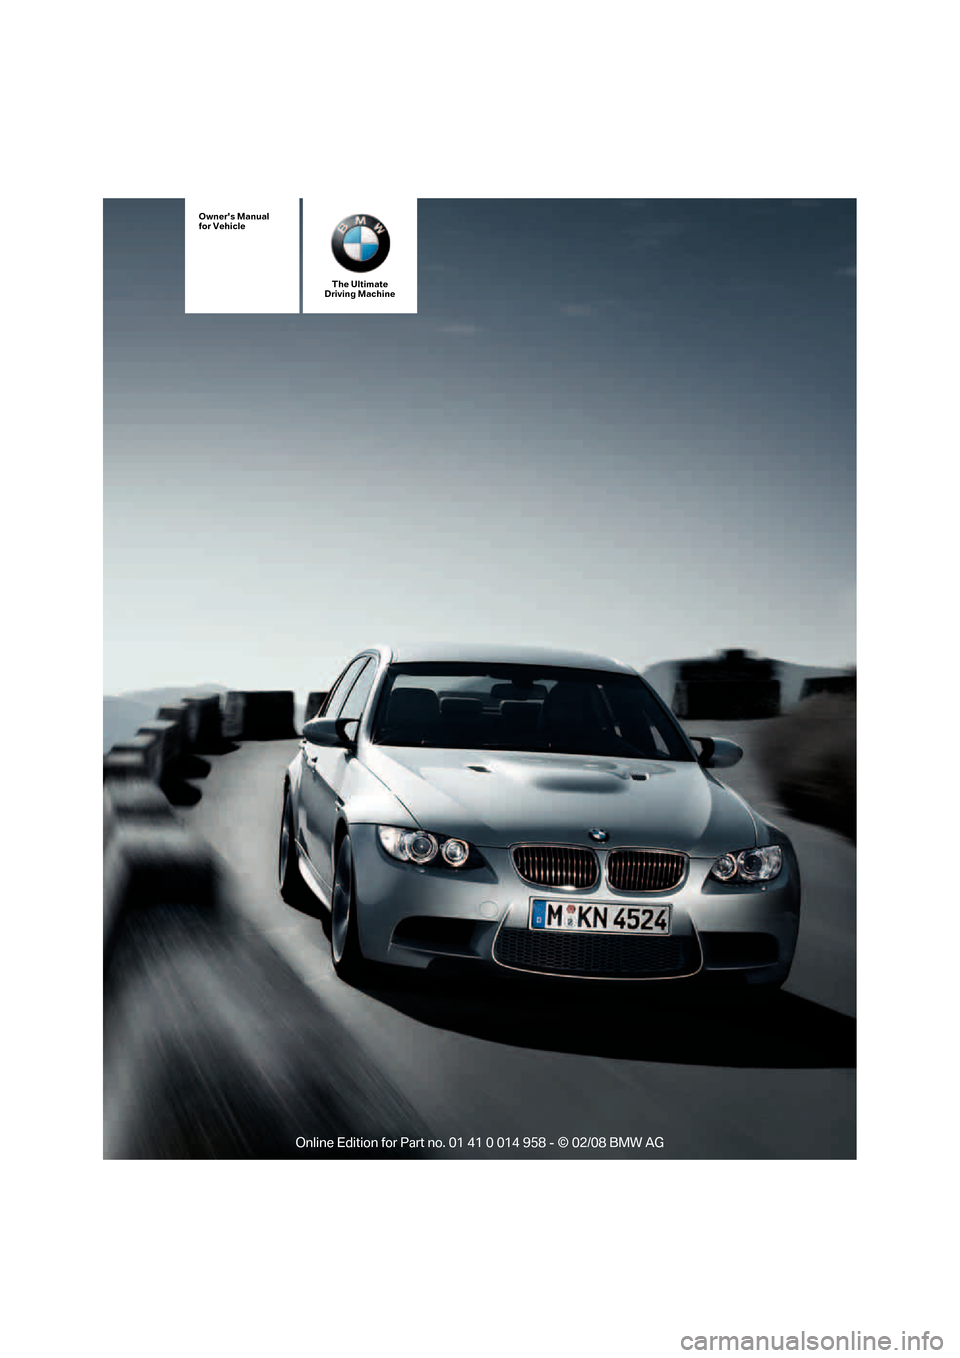 BMW M3 SEDAN 2008 E90 Owners Manual The Ultimate
Driving Machine
Owners Manual
for Vehicle 